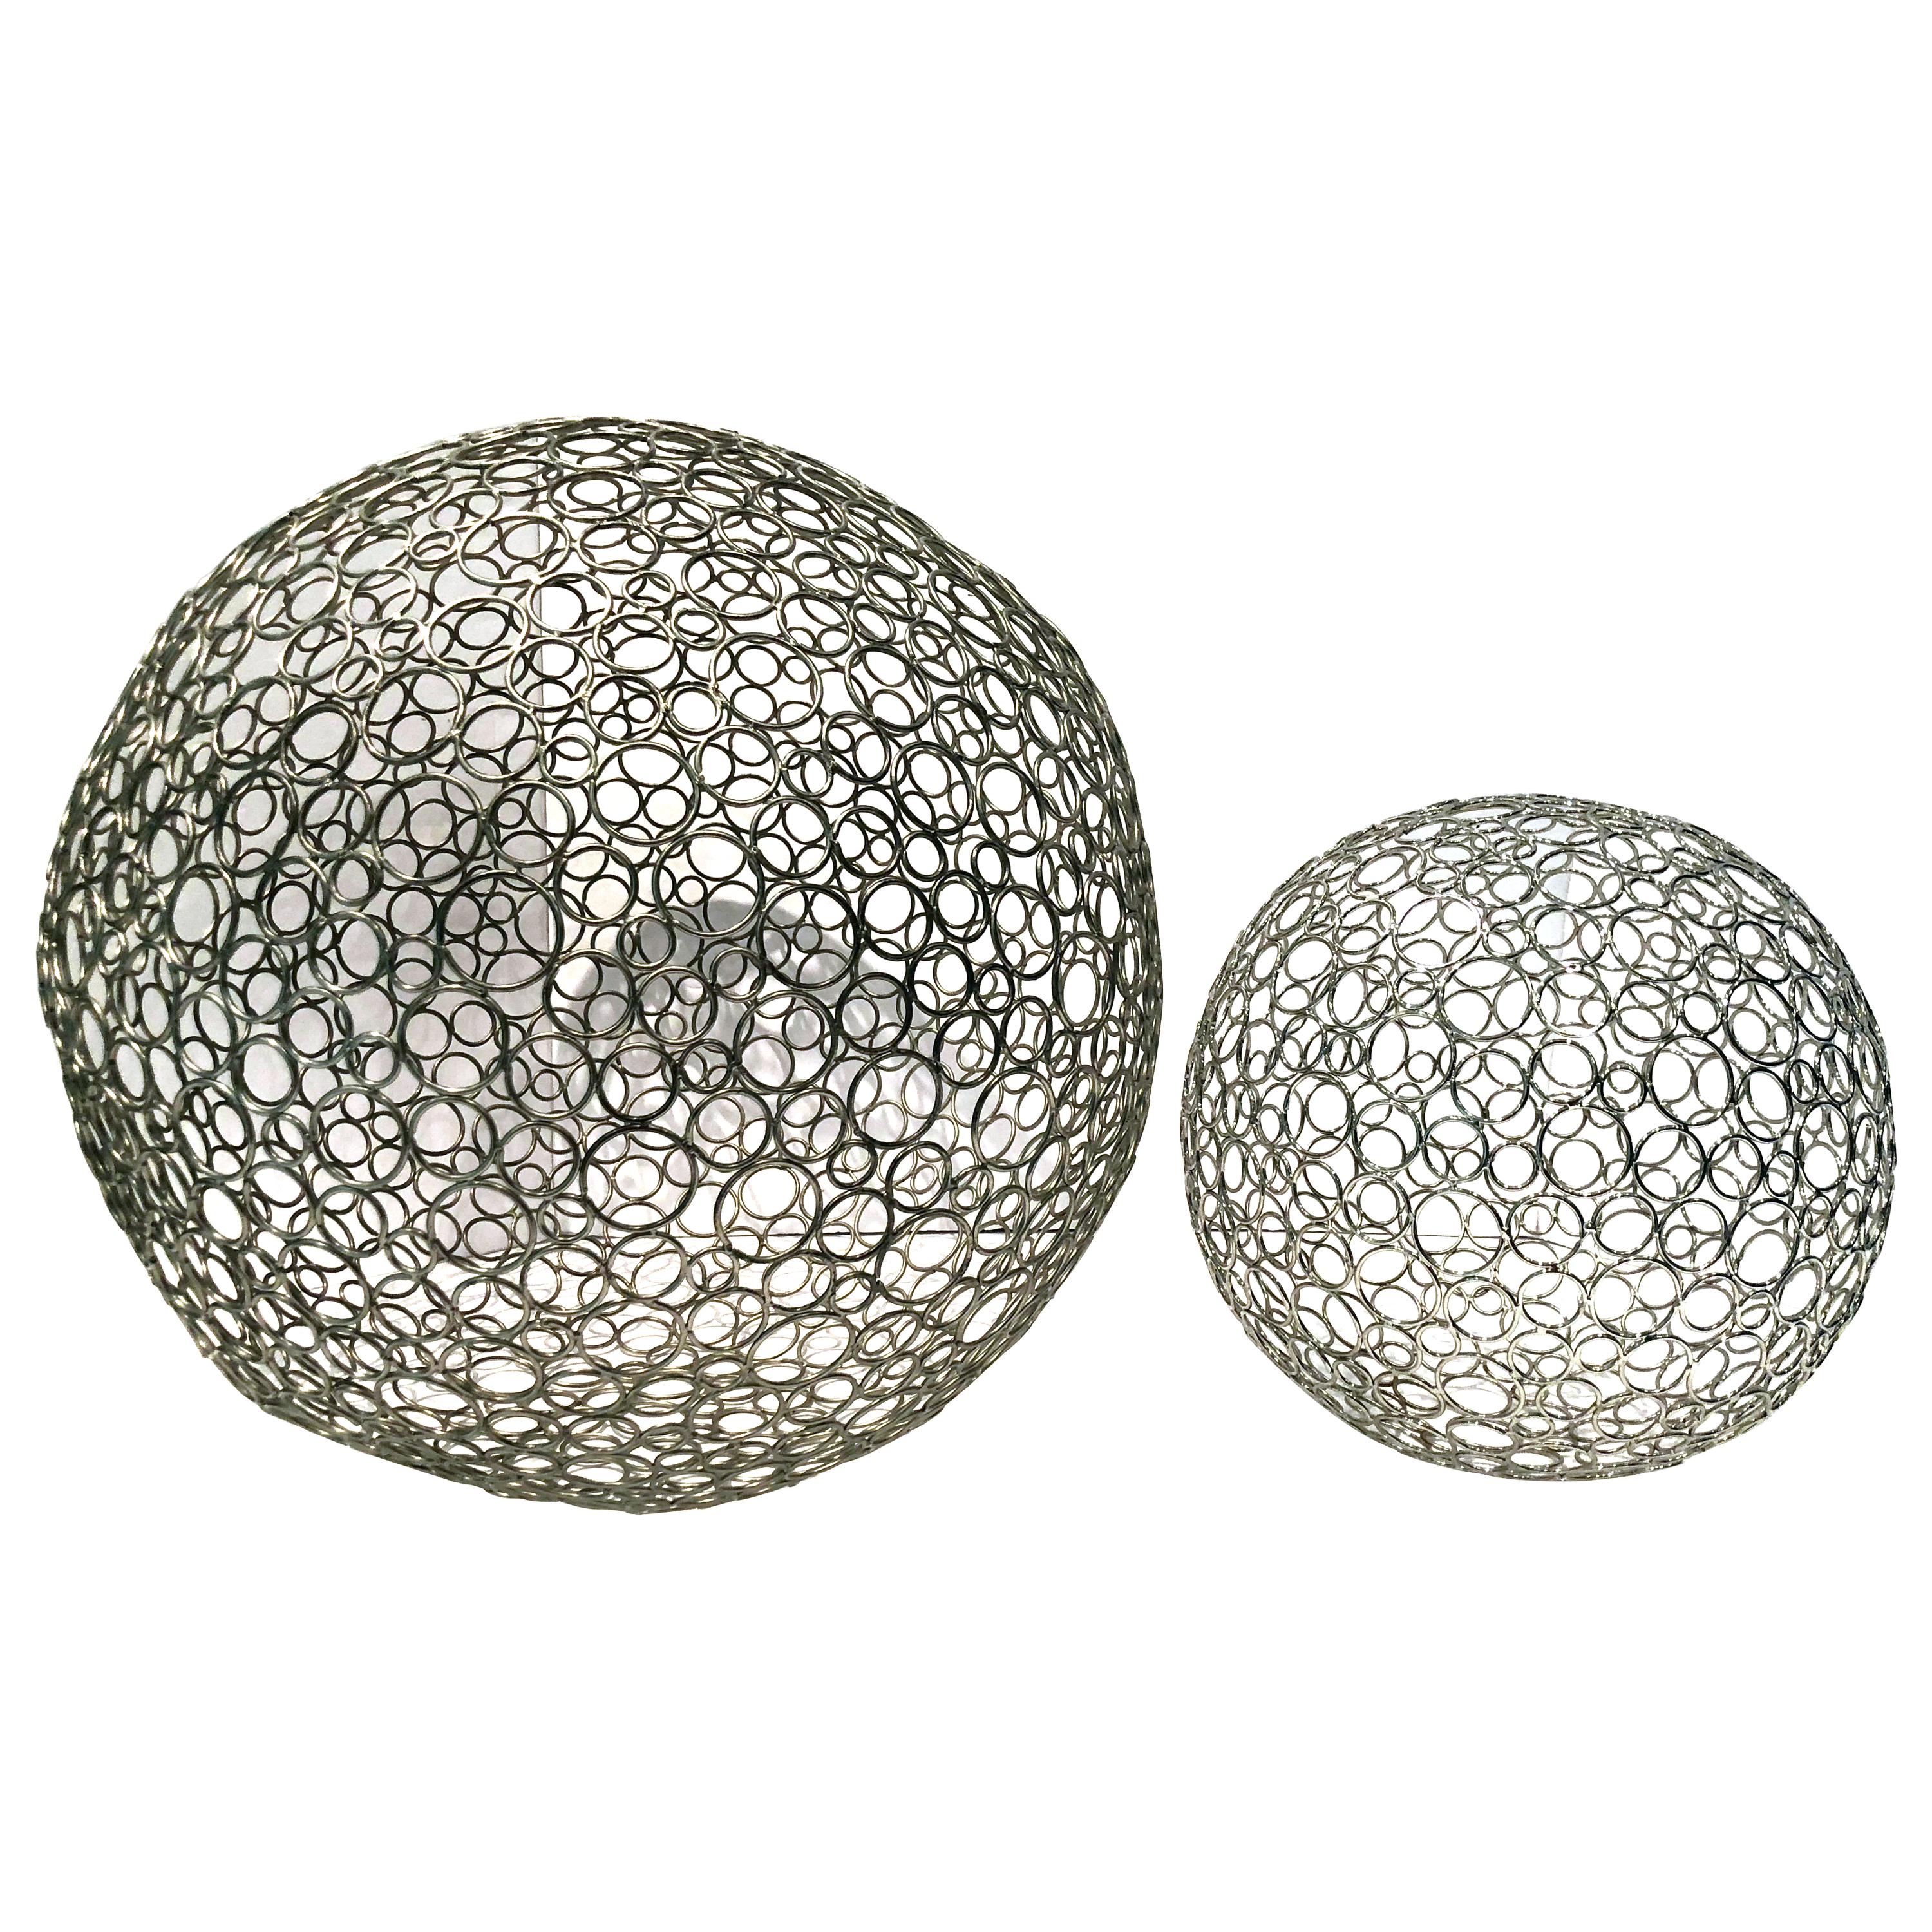 Cool Pair of Artisan Made Wire Sphere Sculptures